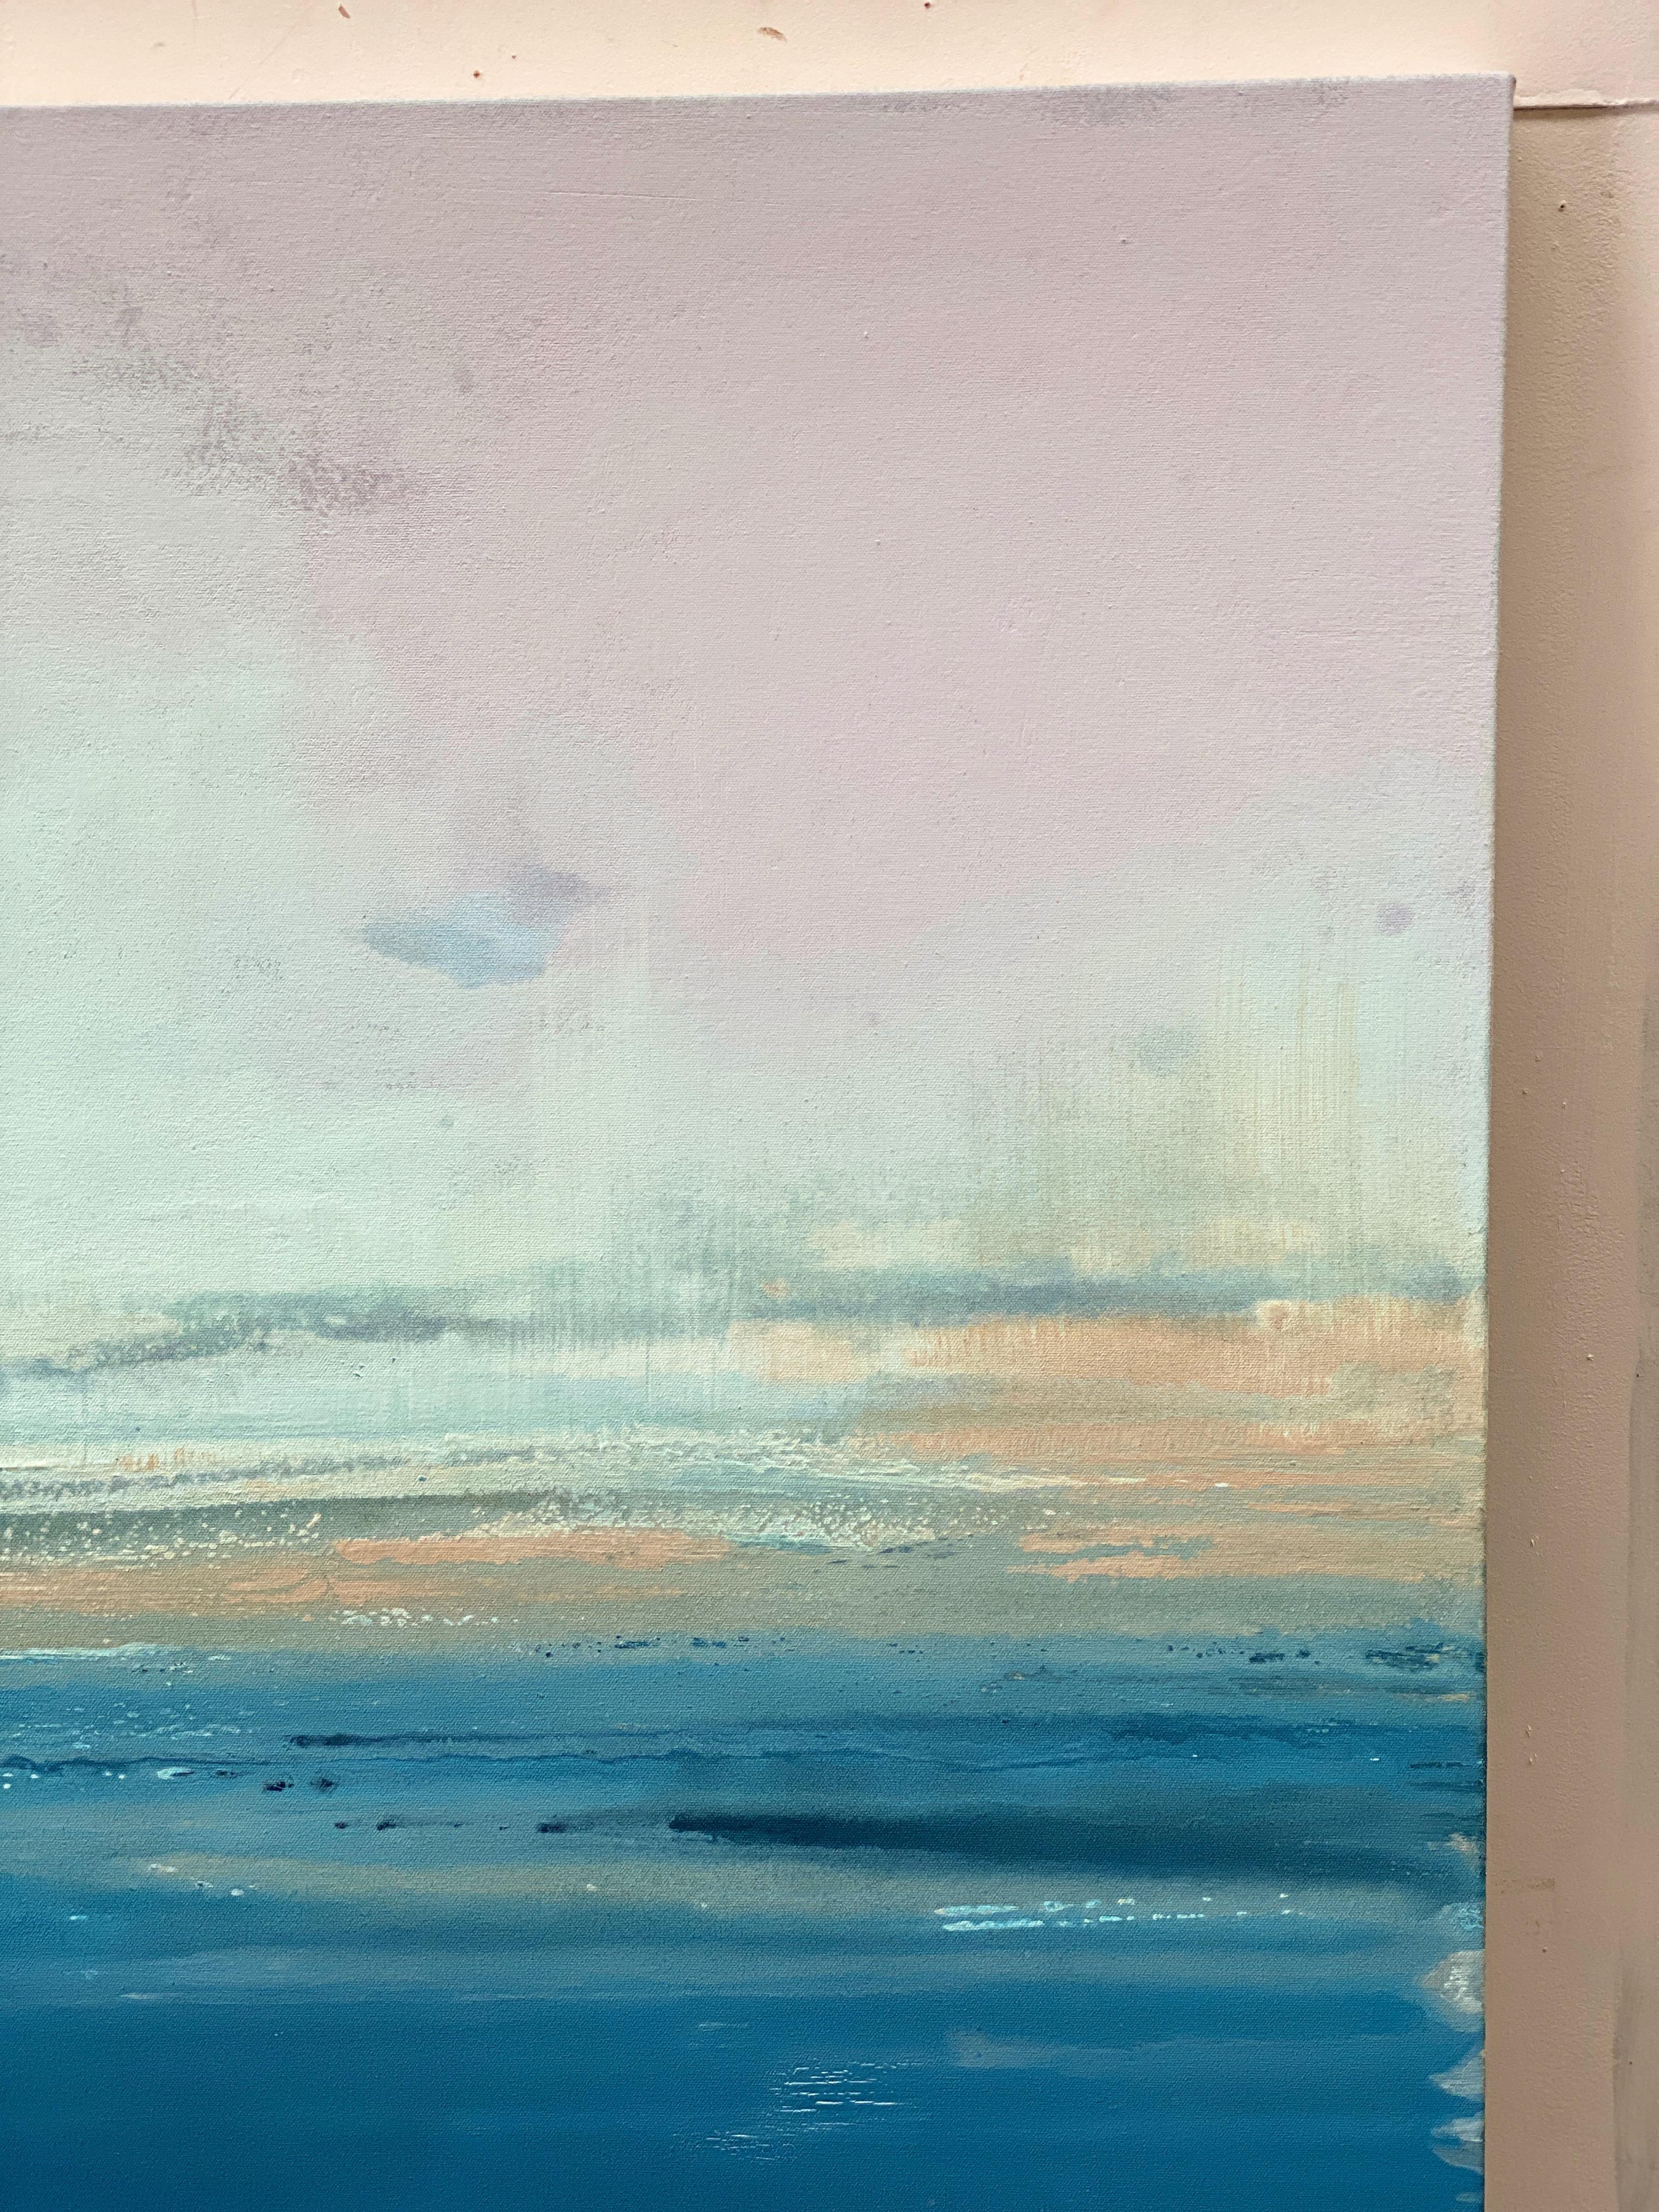 'Happiness' Present Moment Collection

Emanating light, energy and movement, this is large dynamic minimalist abstract is painted in colours of sea and pastel blue, mist and white. Layered paint reveal descriptive textures, delicate details, thick